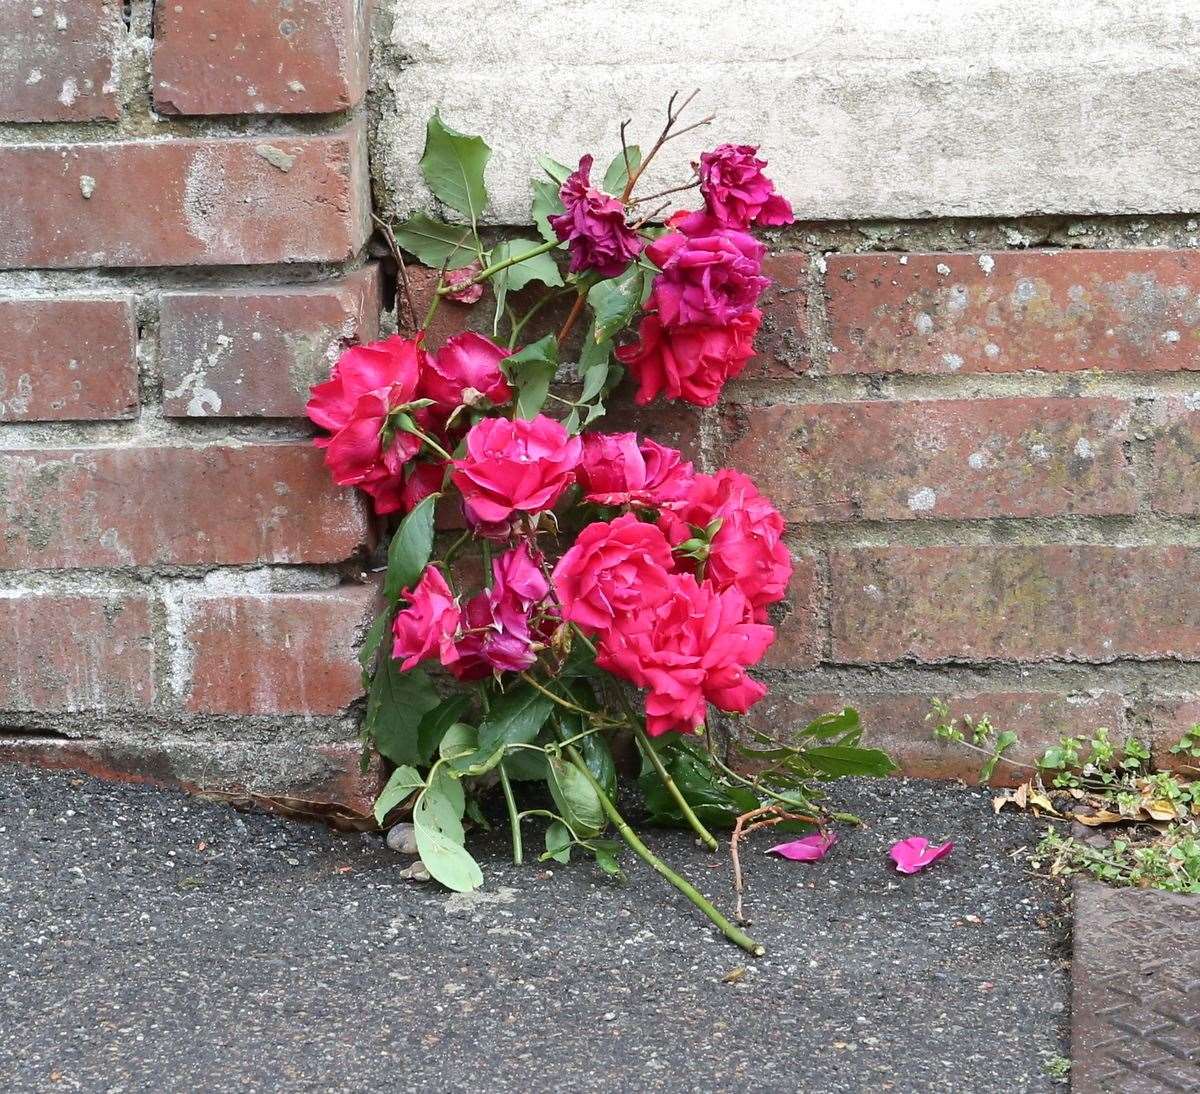 Flowers have been left at the scene. Picture: UKnip (36531208)